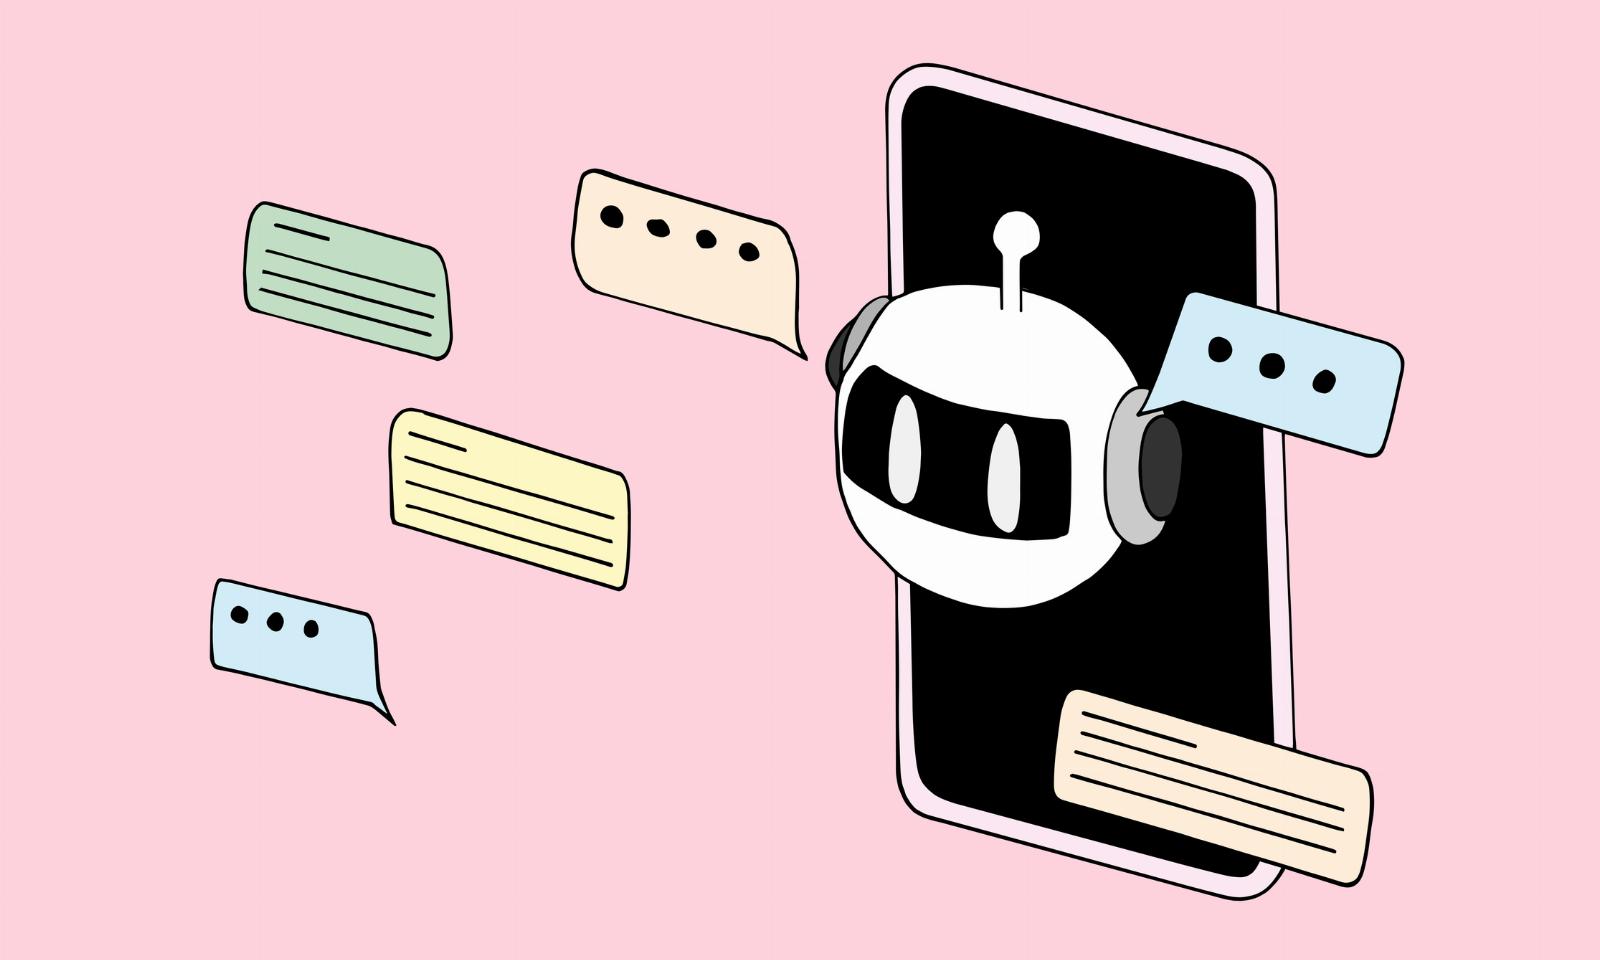 Treating a chatbot nicely might boost its performance — here’s why